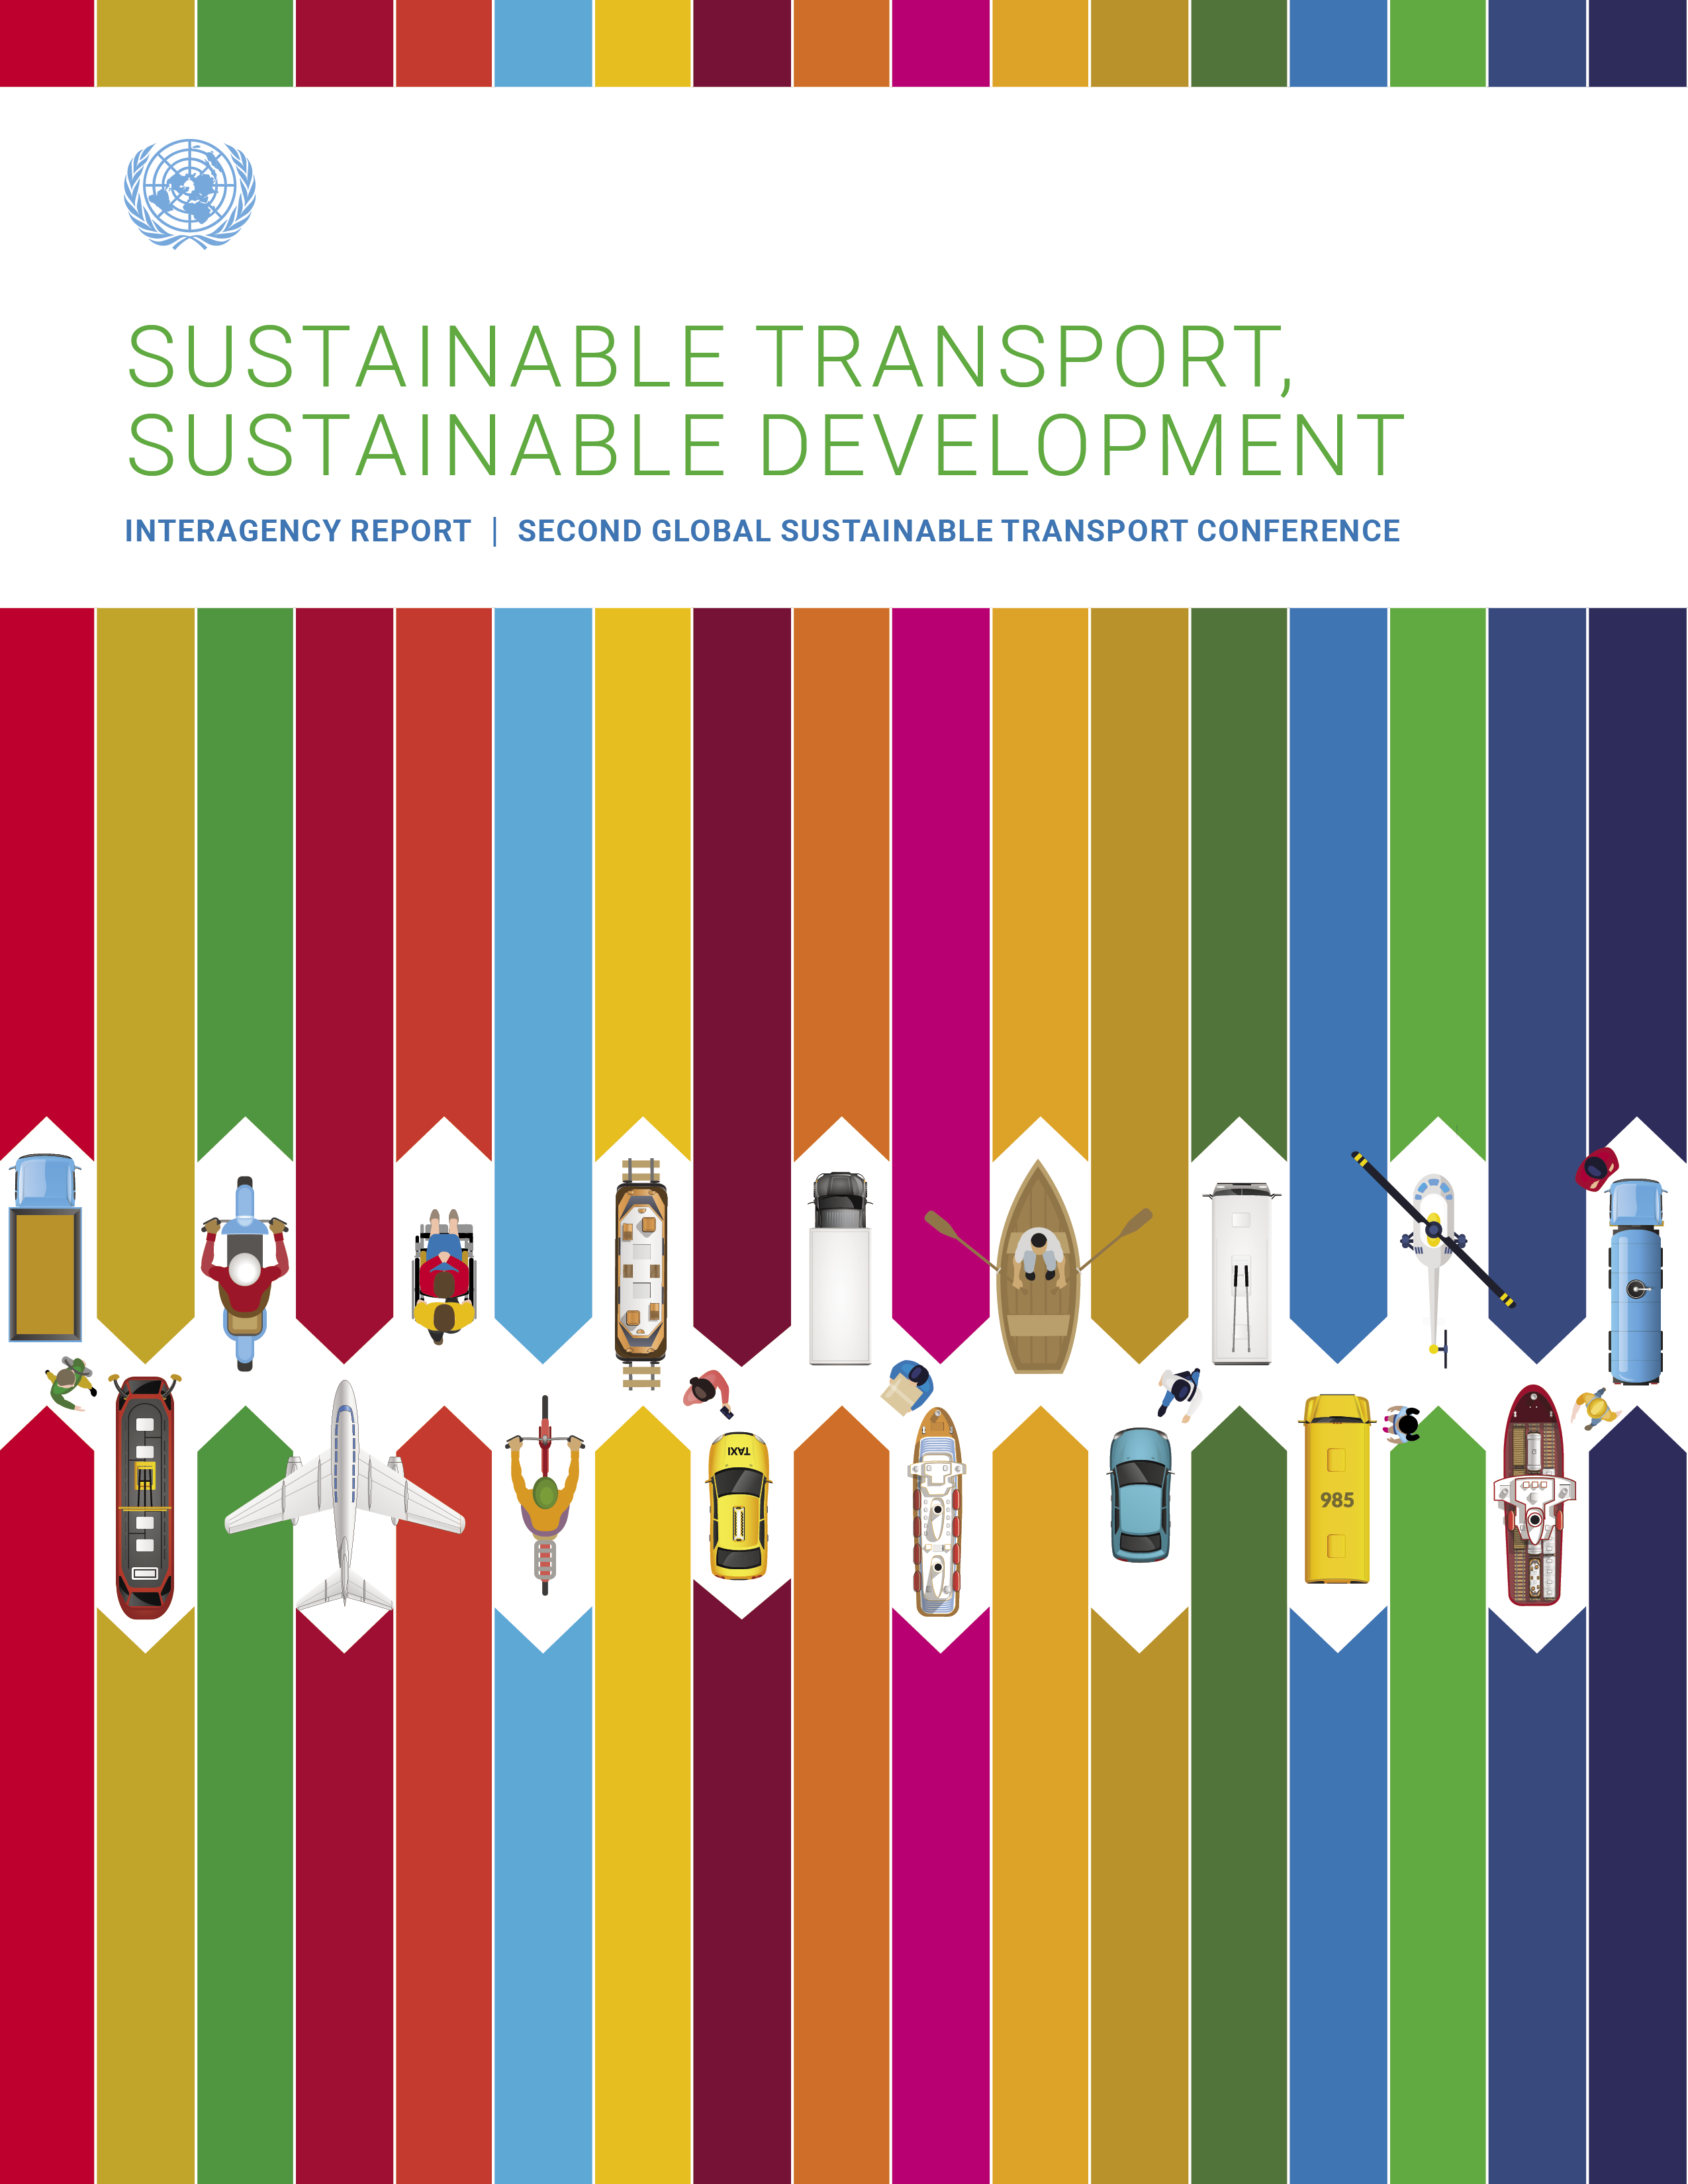 Second Global Sustainable Transport Conference United Nations